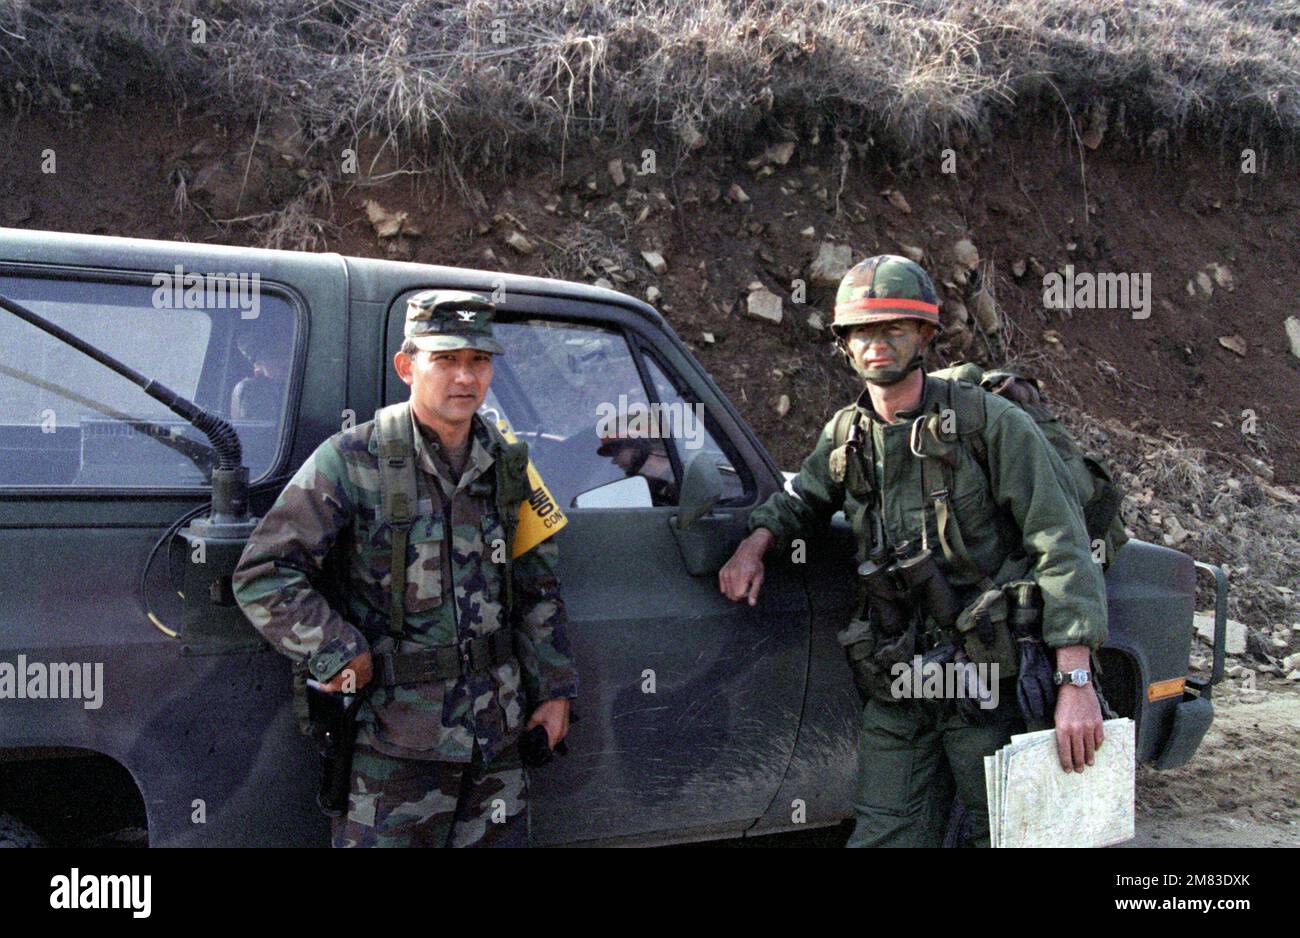 COL. Donald Oura, commander, 29th Brigade, Hawaii Army National Guard, speaks with LT. COL. George Close, commander, 1ST Bn., 5th Inf., 25th Inf. Div., during the joint U.S./Korea exercise Team Spirit '85. Oura is acting as the chief controller for the 1st Brigade, 25th Inf. Div., during the exercise. Subject Operation/Series: TEAM SPIRIT '85 Base: Geumsa Ri Country: South Korea Stock Photo